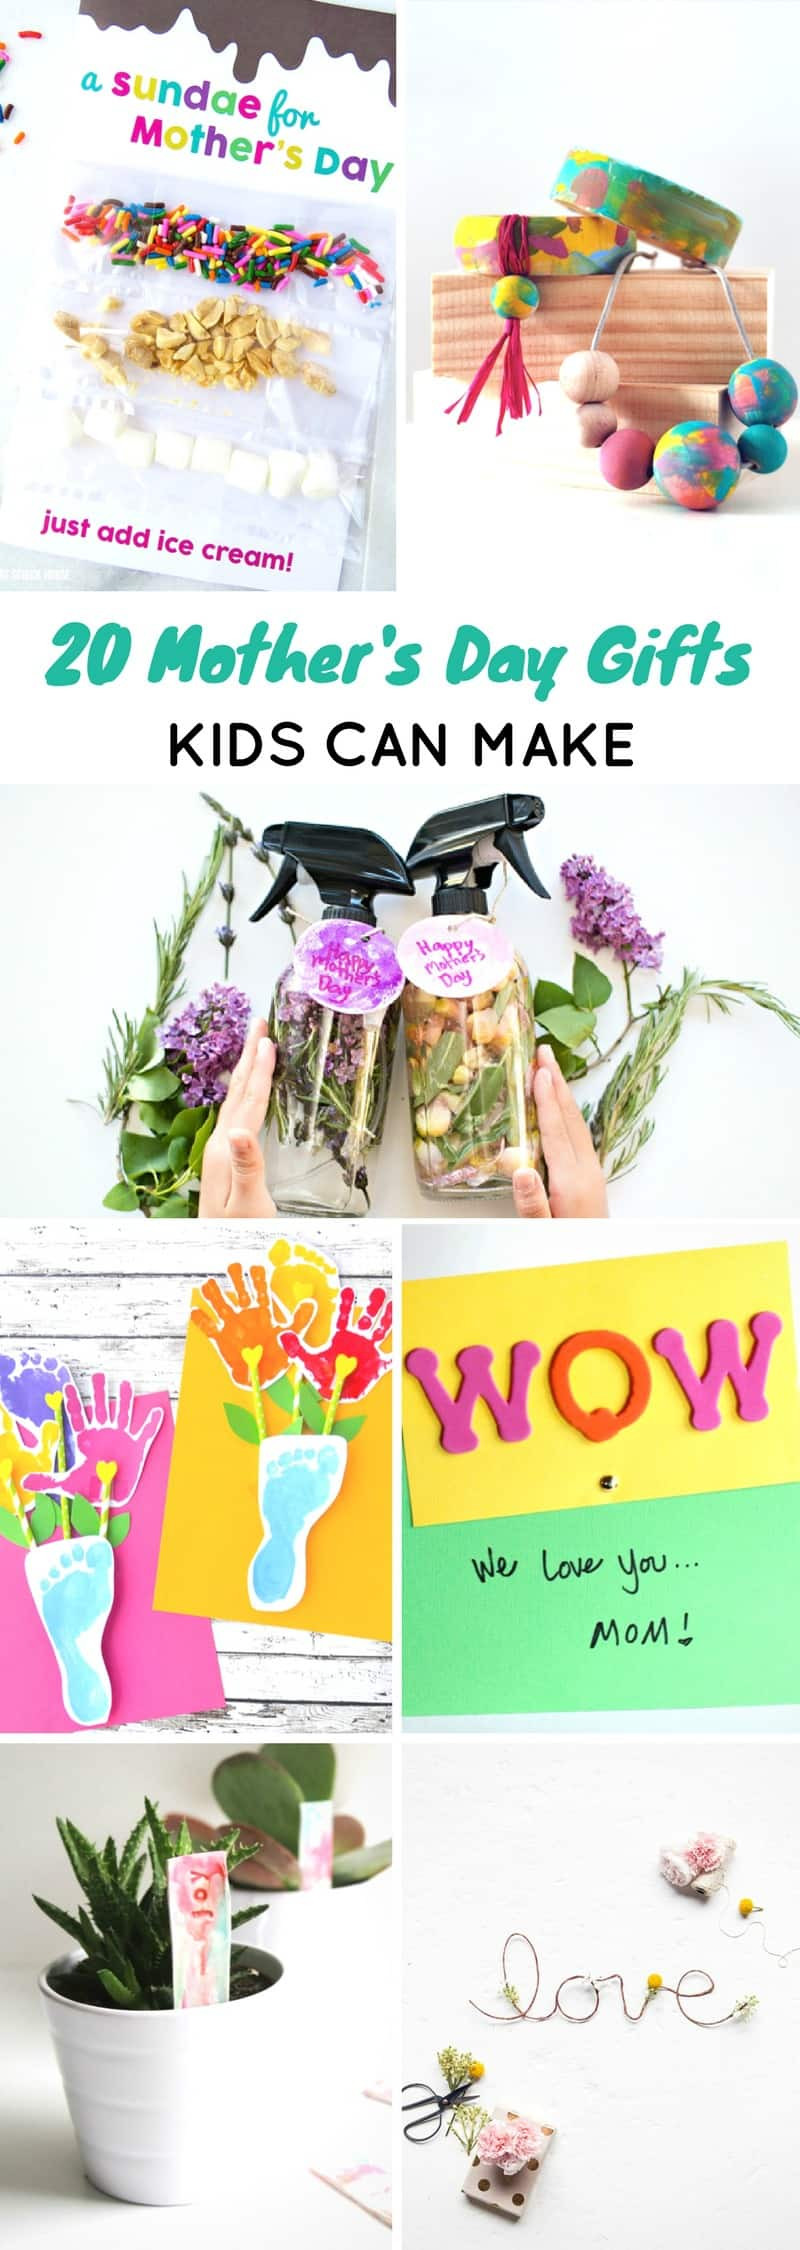 Mothers Day Gifts Kids Can Make
 20 Creative Mother s Day Gifts Kids Can Make